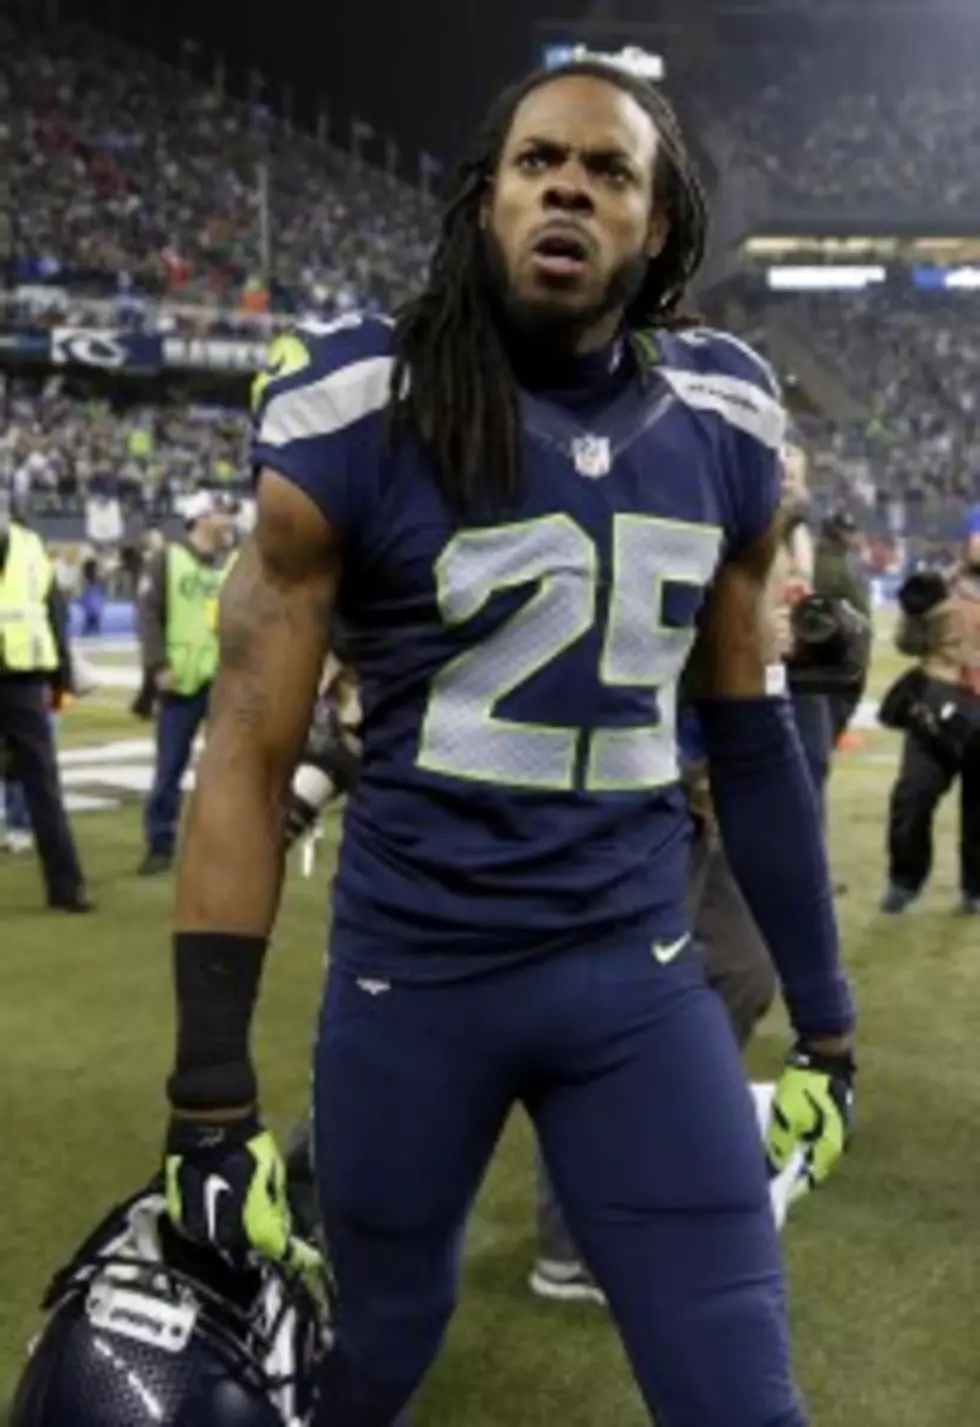 Sherman Crosses The Line From Confidence To Classless